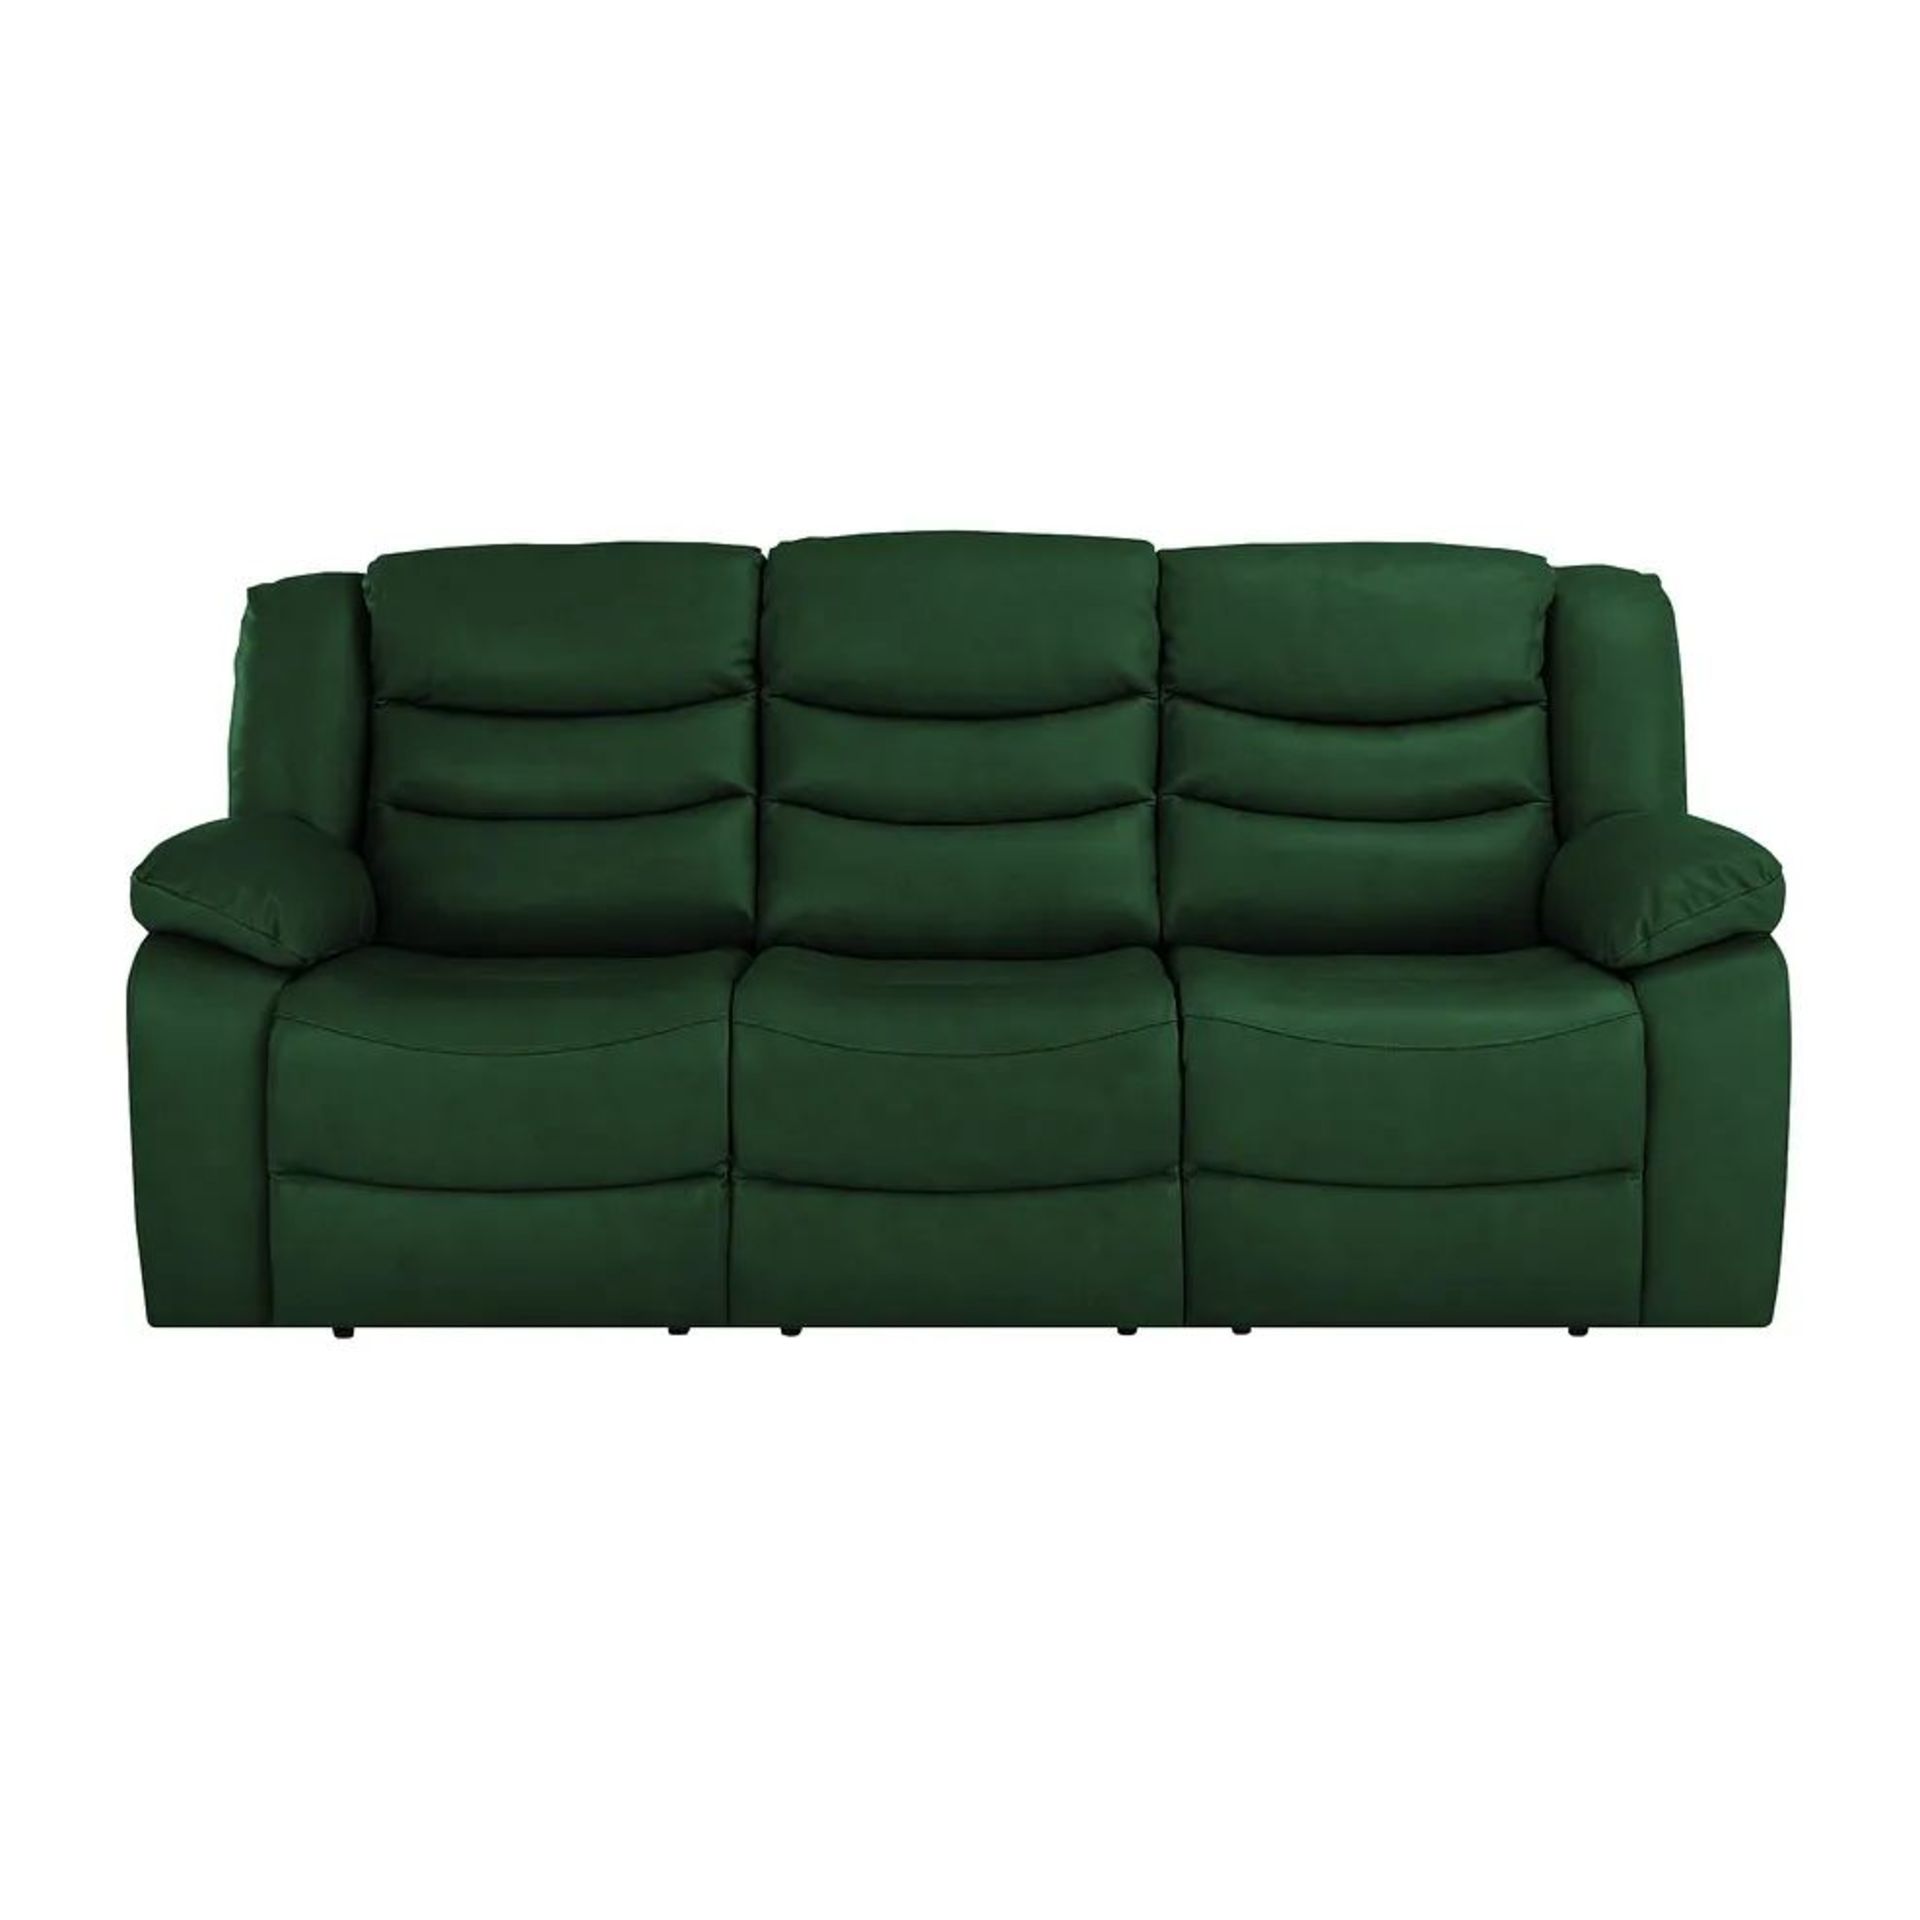 BRAND NEW MARLOW 3 Seater Sofa - GREEN LEATHER. RRP £1599. Our Marlow leather sofa range is a - Image 2 of 7